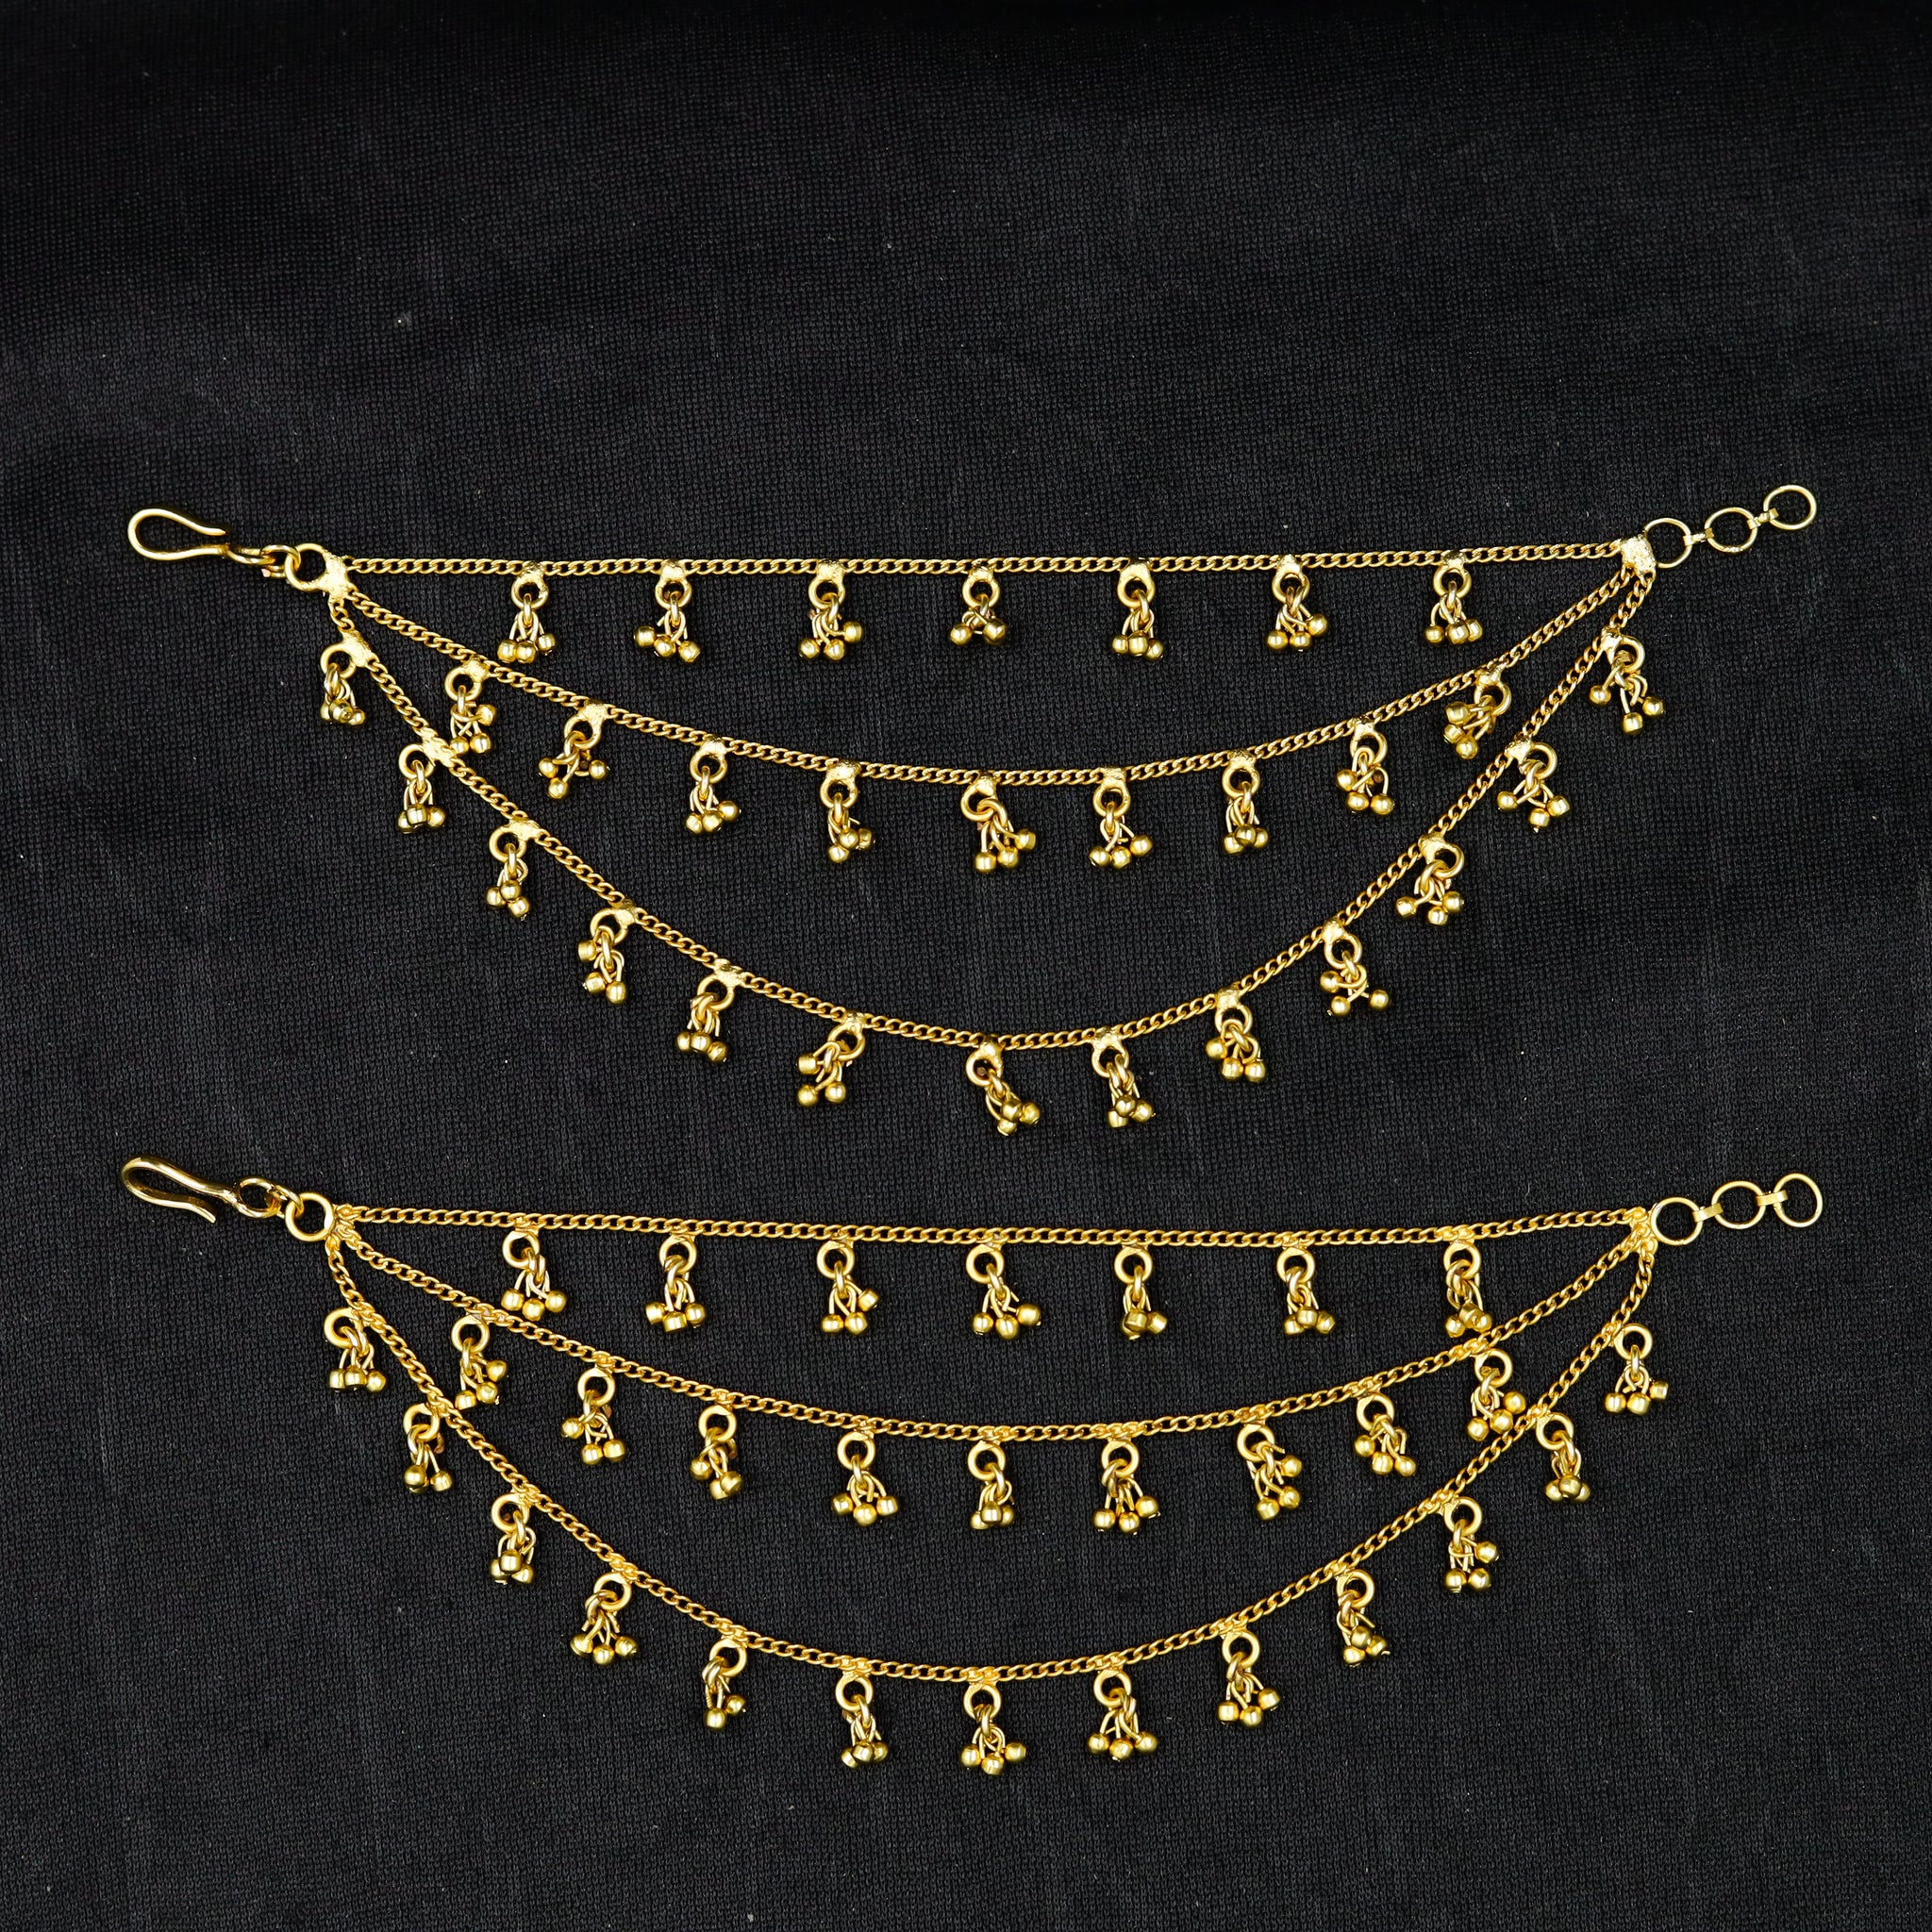 Antique Gold Kan Chain 10188-28